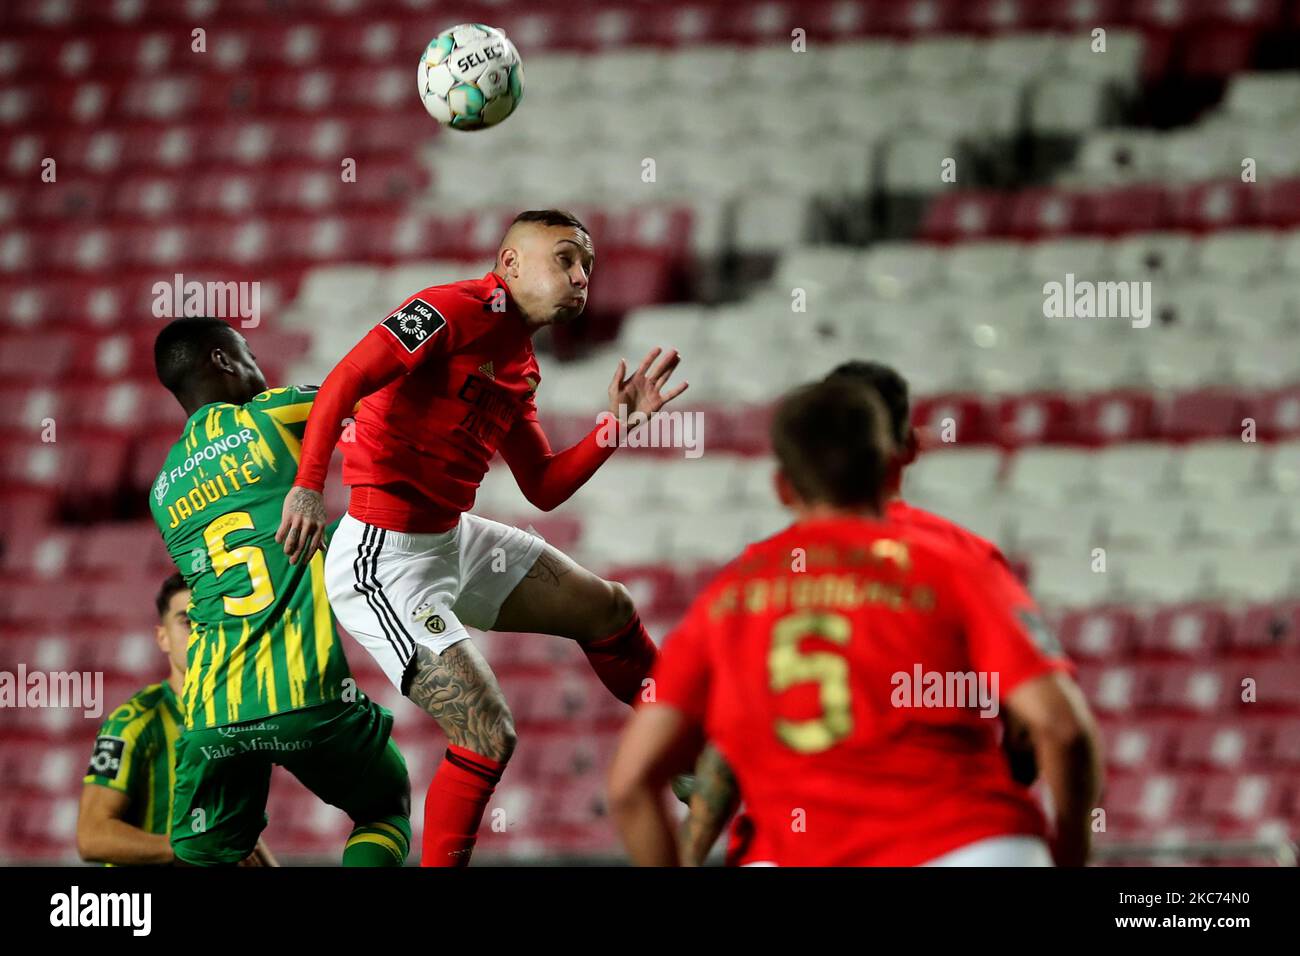 Everton of SL Benfica (top R ) vies with Jaquite of CD Tondela during the Portuguese League football match between SL Benfica and CD Tondela at the Luz stadium in Lisbon, Portugal on January 8, 2021. (Photo by Pedro FiÃºza/NurPhoto) Stock Photo